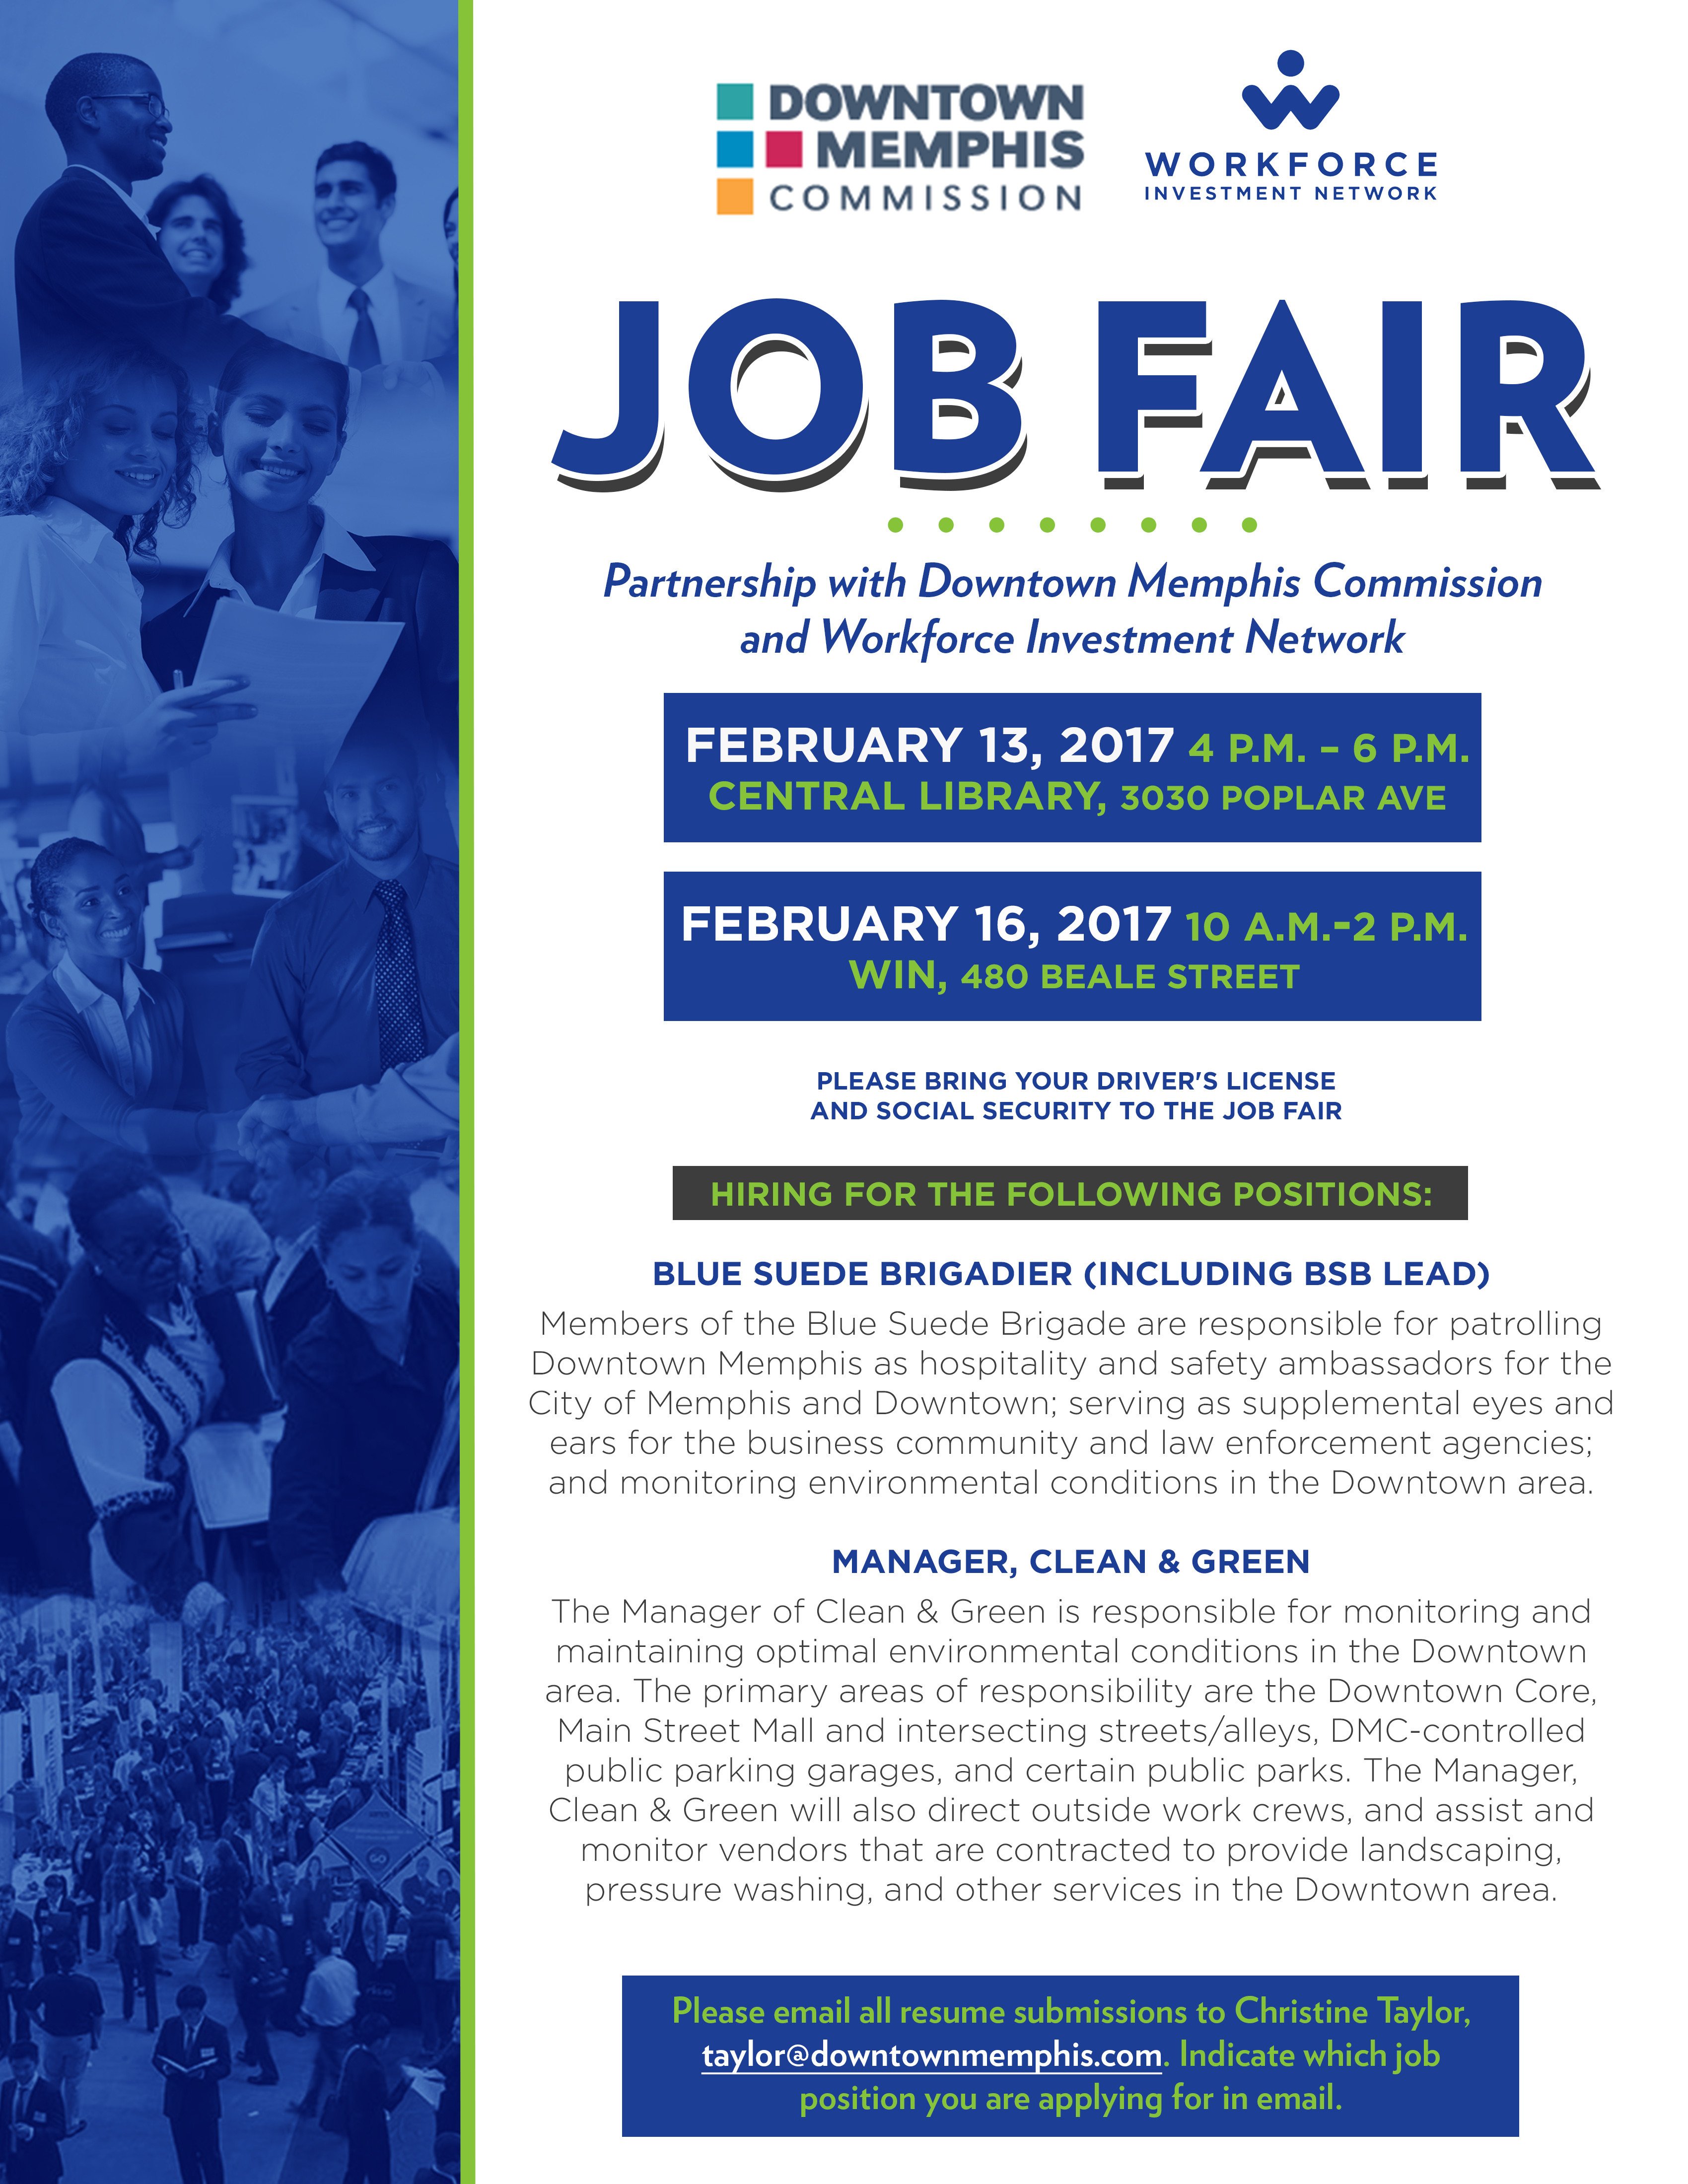 Job Fair Flyer Template Job Fair Hosted by Downtown Memphis Mission and